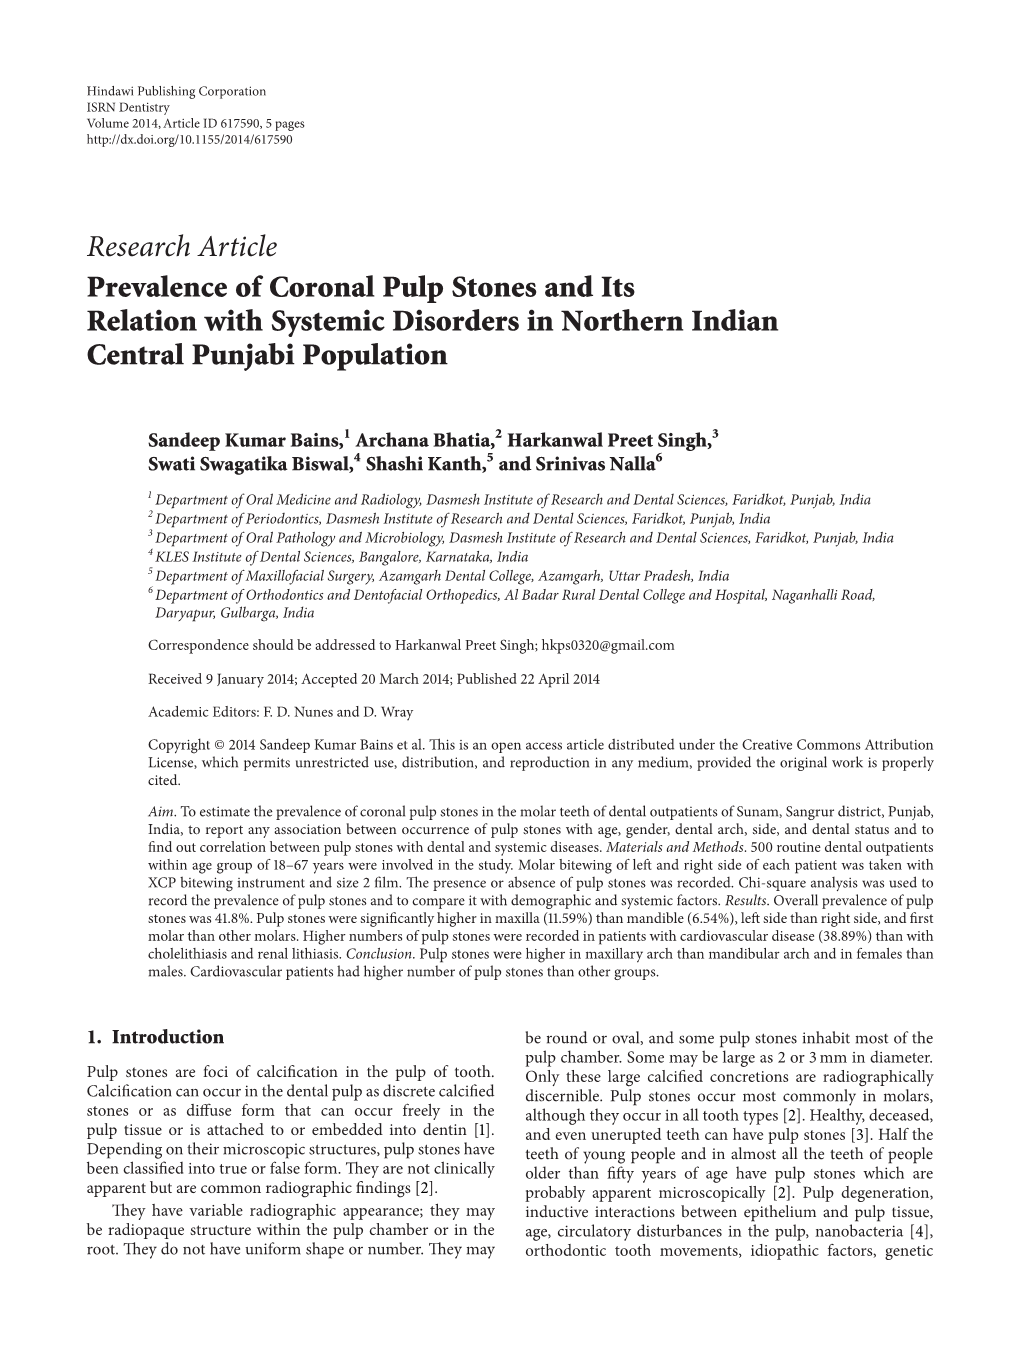 Prevalence of Coronal Pulp Stones and Its Relation with Systemic Disorders in Northern Indian Central Punjabi Population